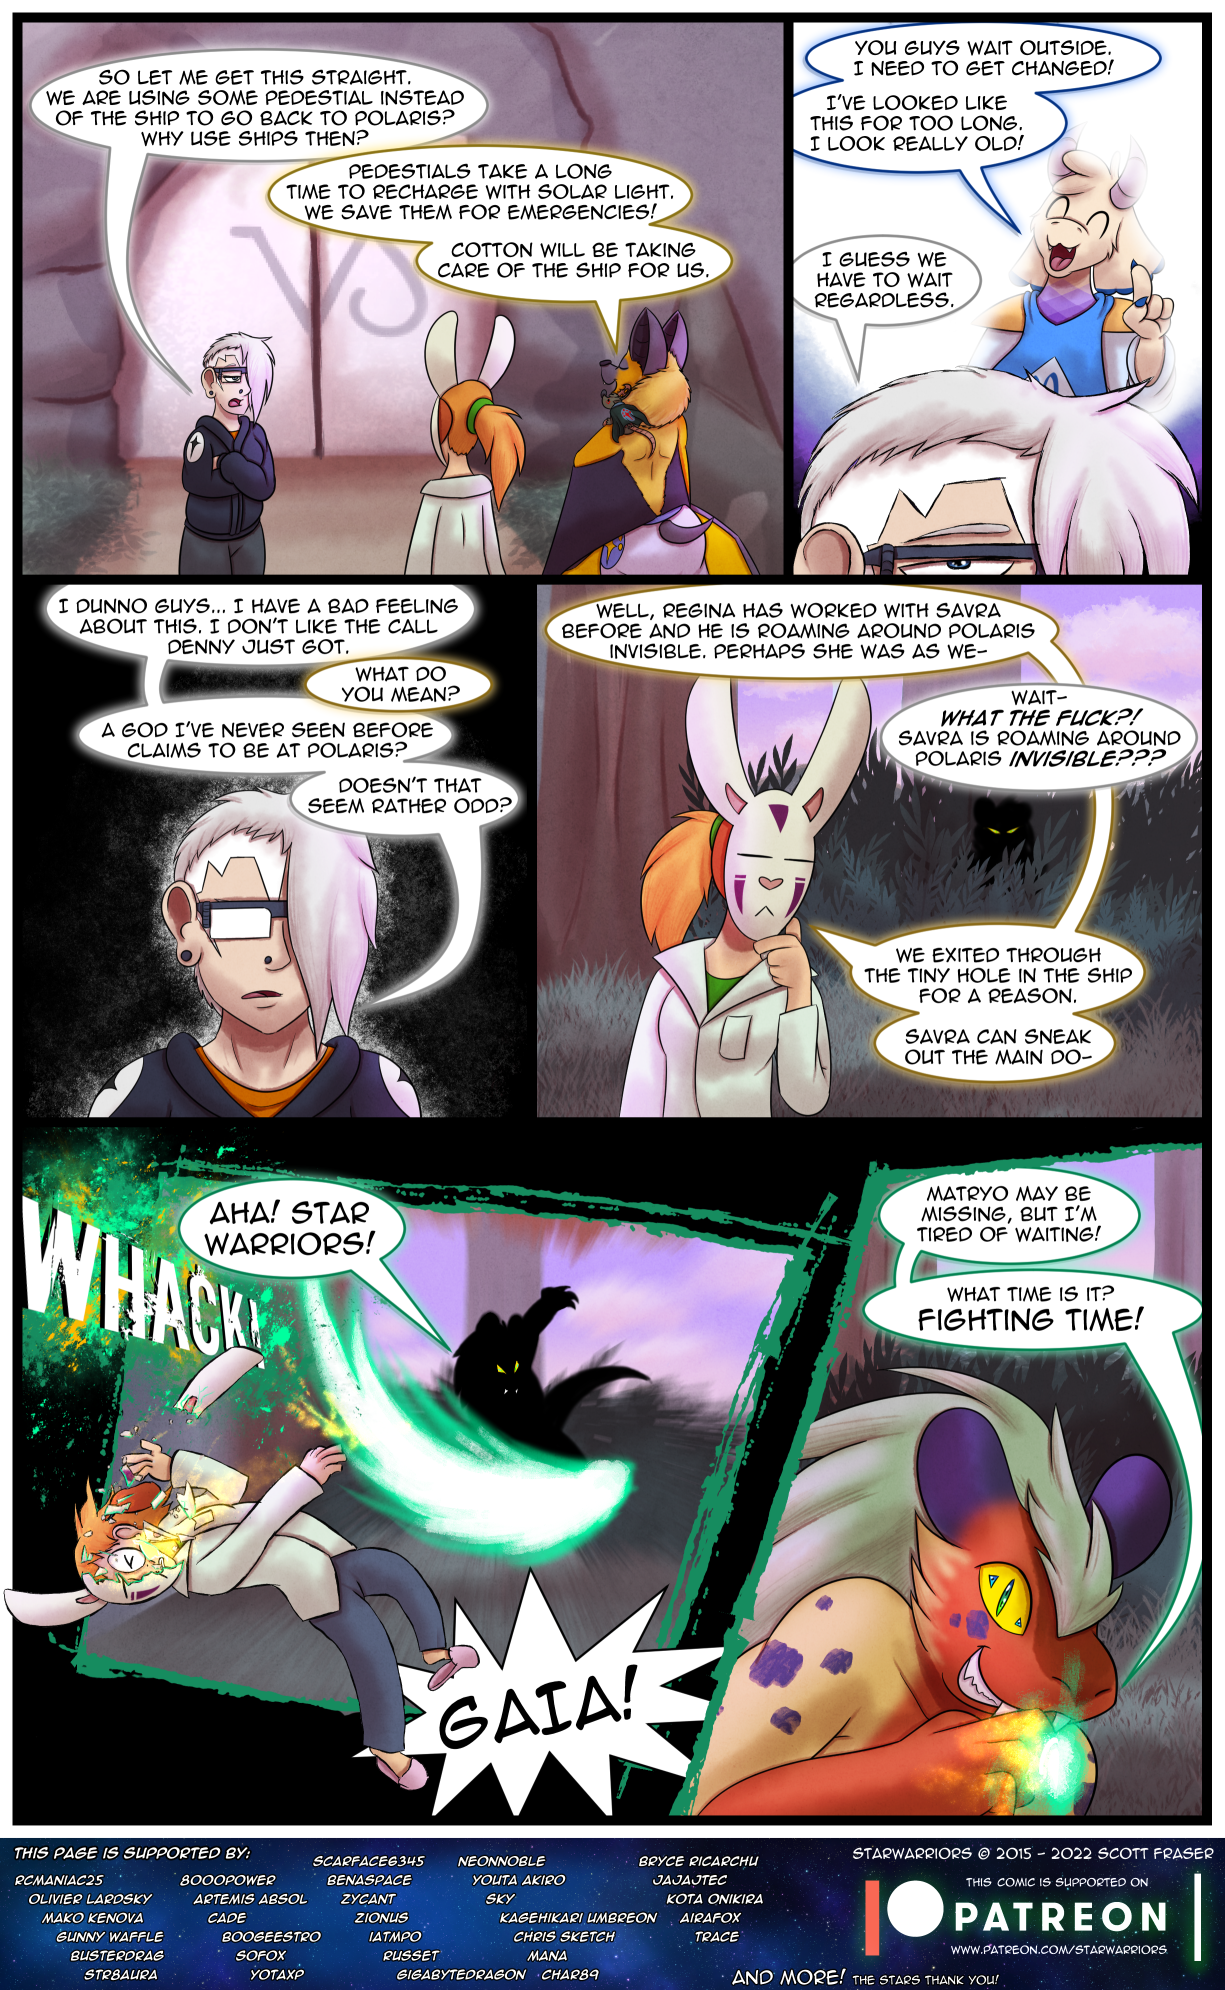 Ch6 Page 2 – Attacked